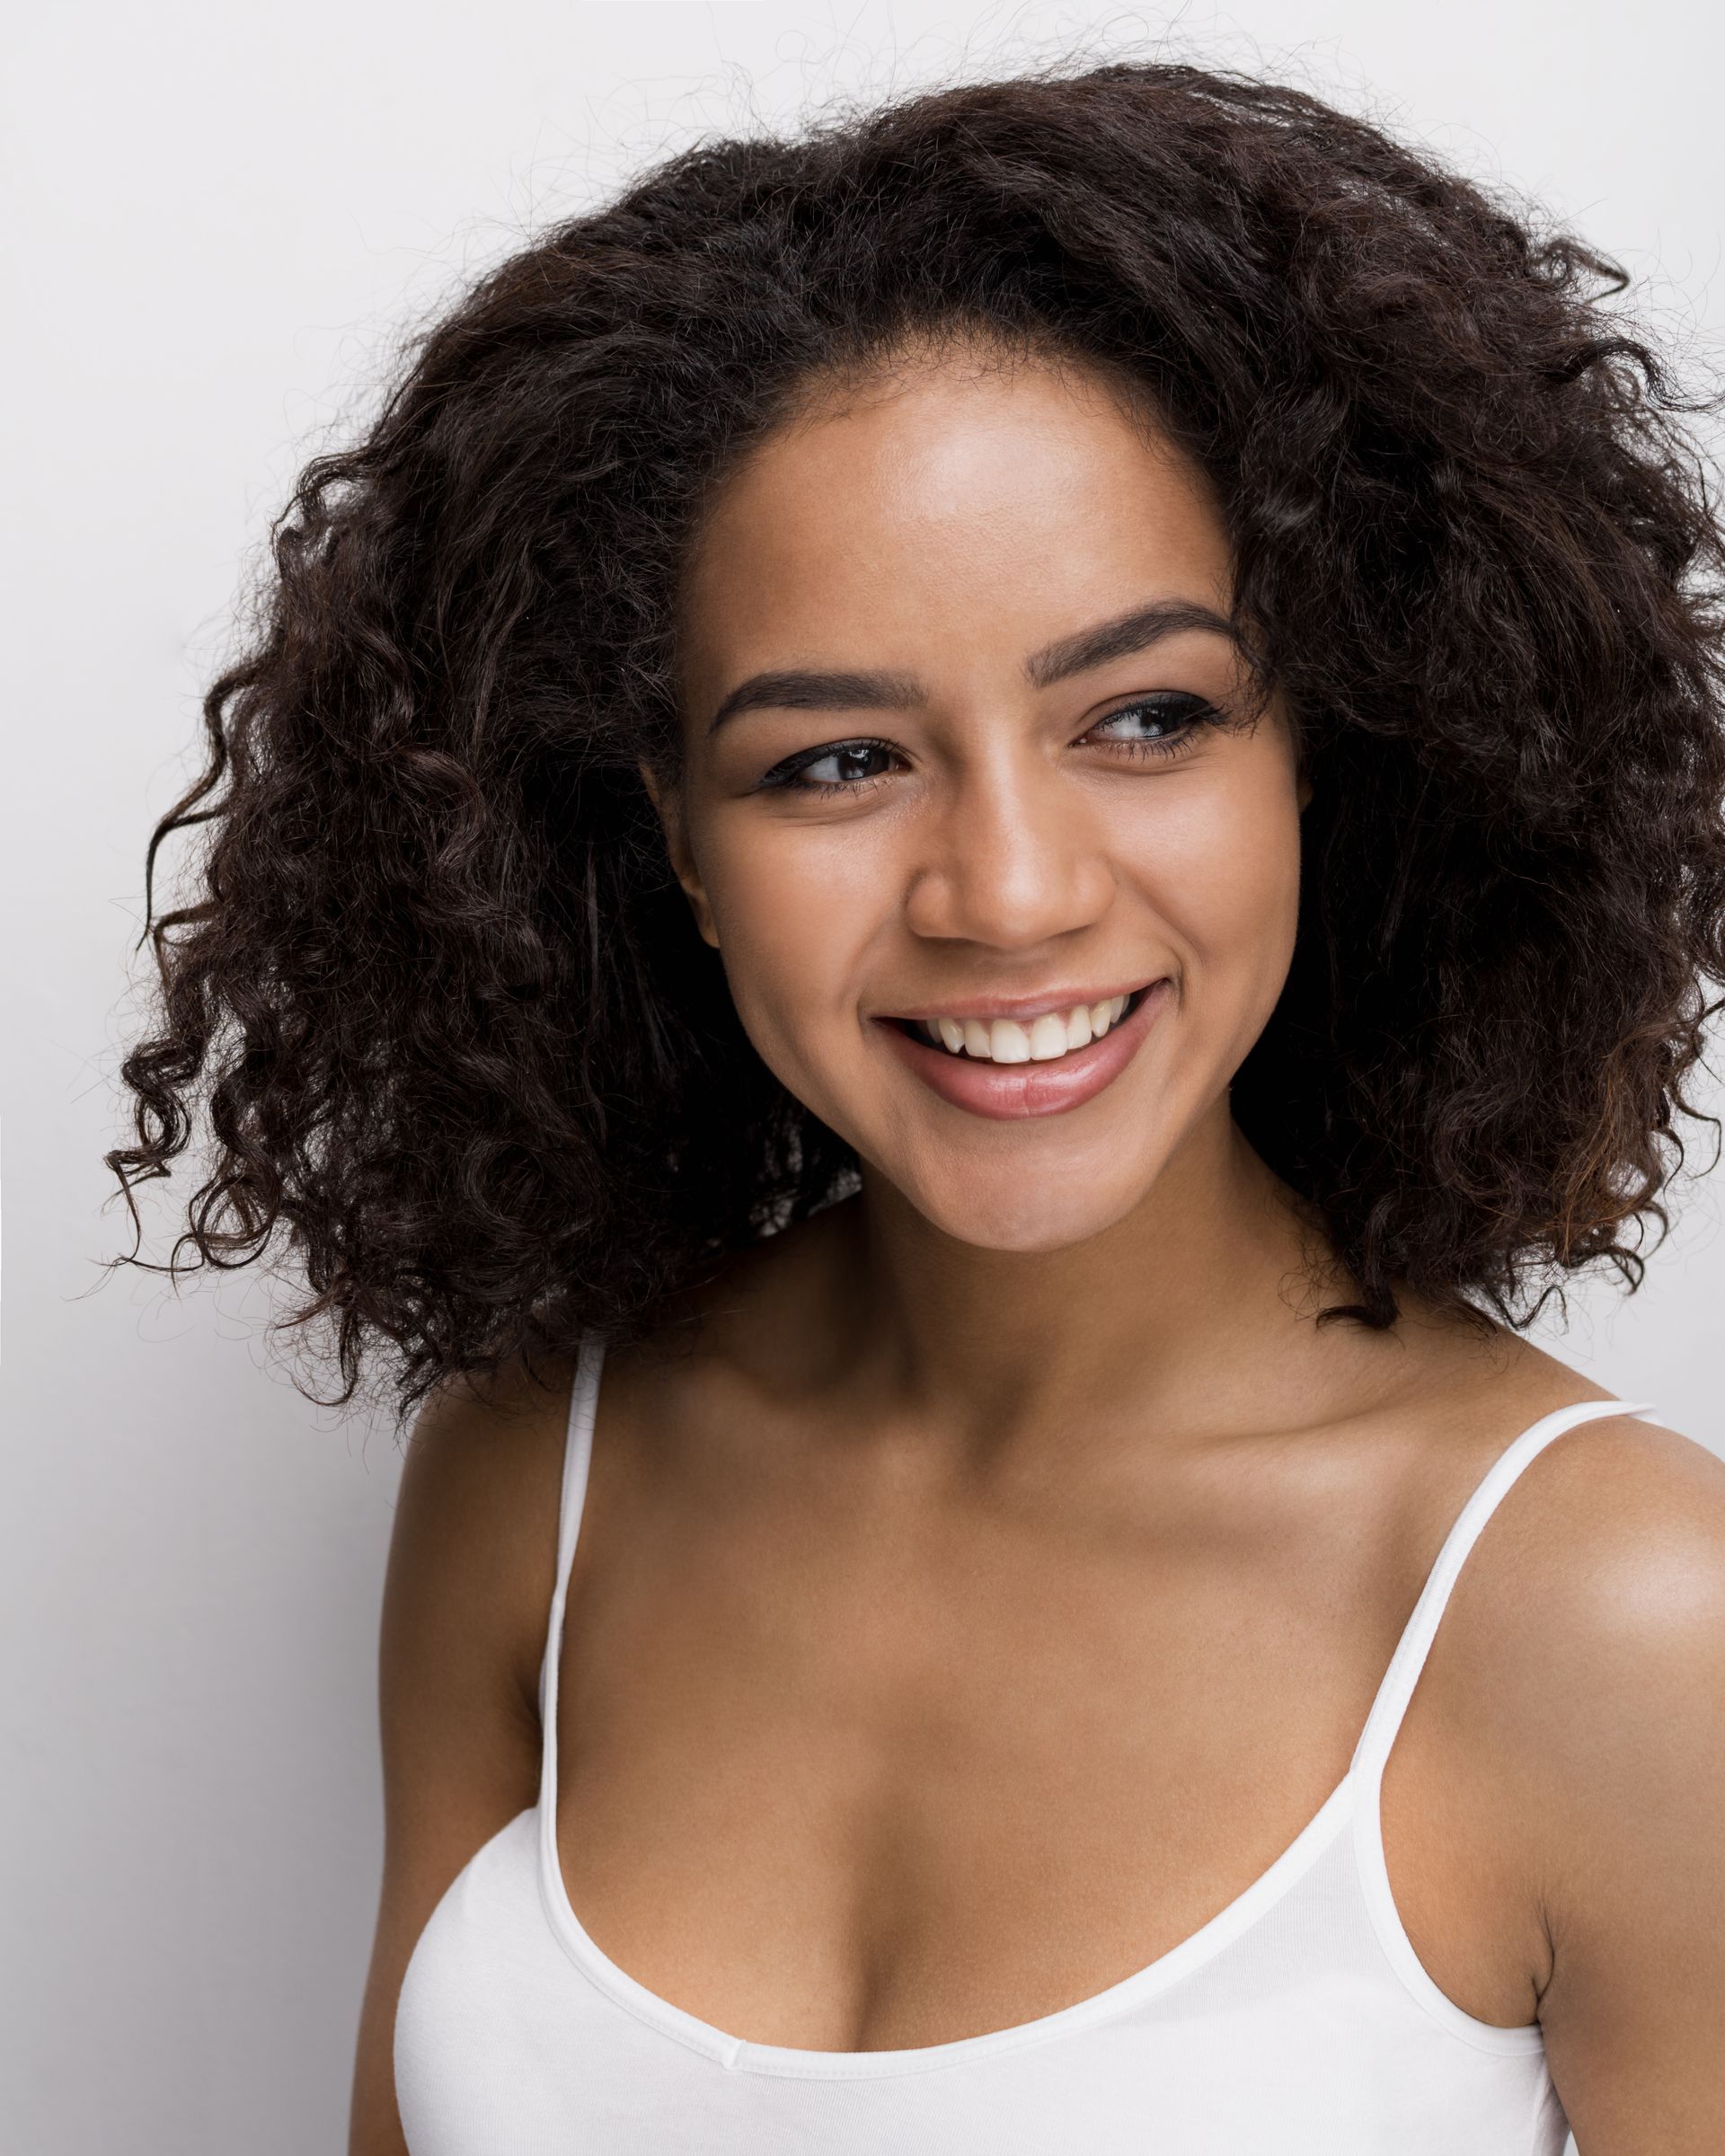 a woman with curly hair is smiling and wearing a white tank top .